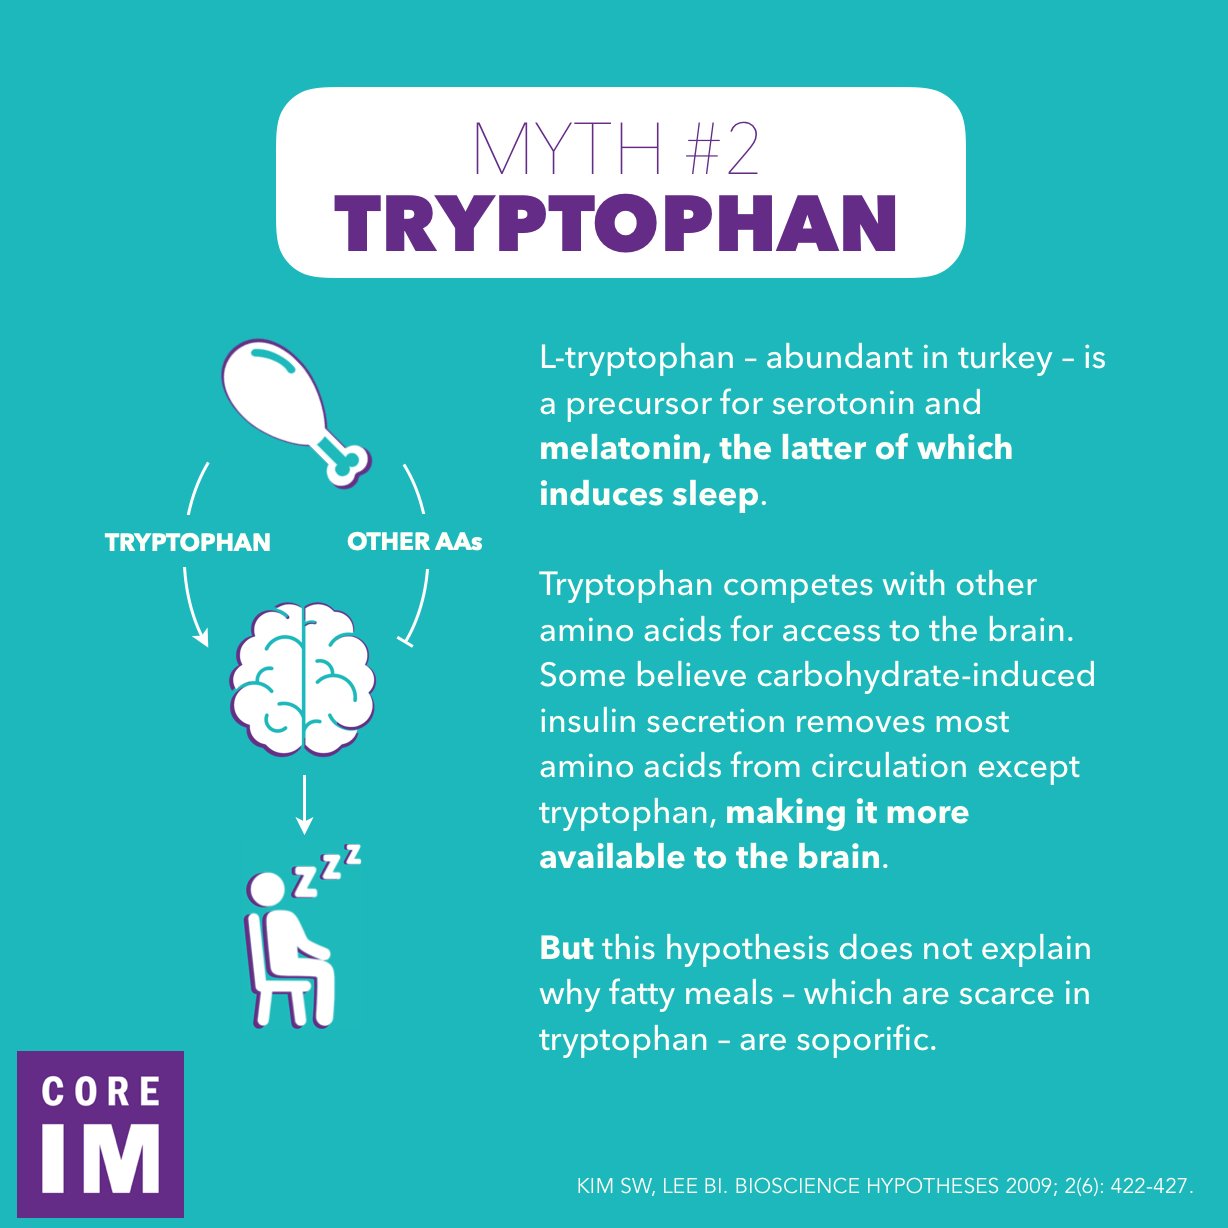 CORE IM on Twitter: "Myth #2: tryptophan – your turkey's fave amino acid! A  precursor to melatonin, L-tryptophan normally competes with other AAs for  brain access. But in the setting of carbo-loading (